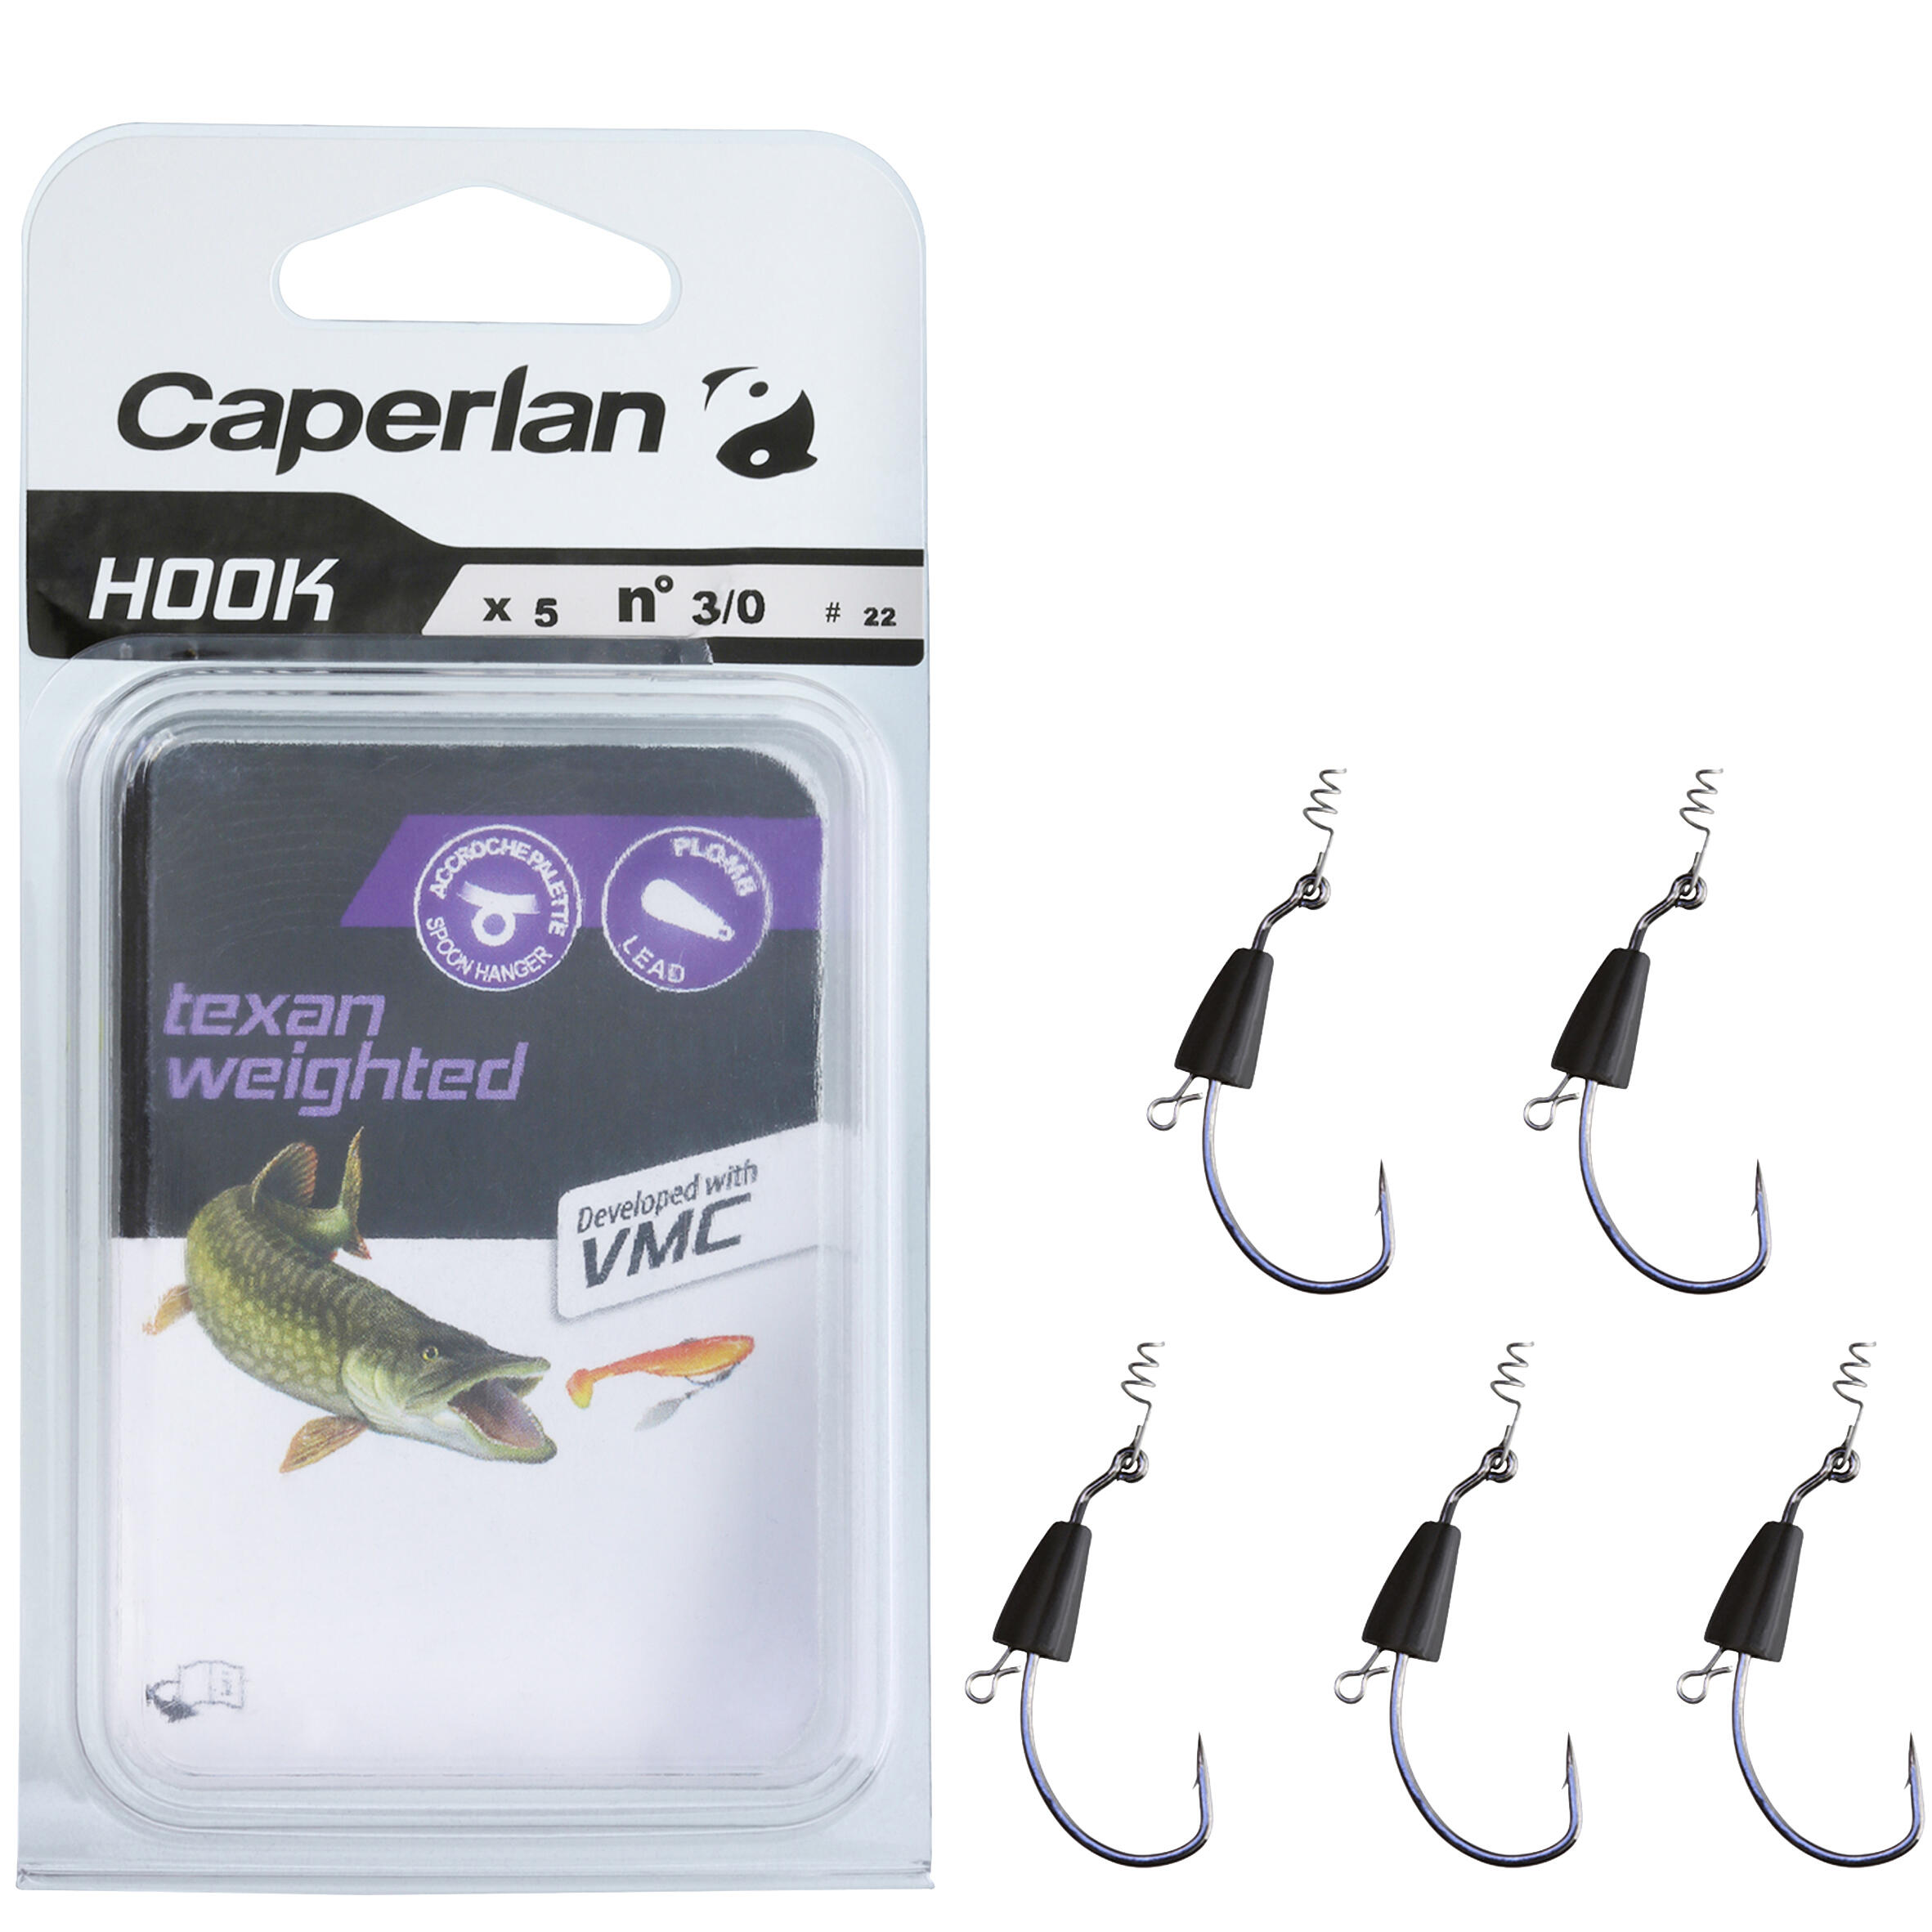 TEXAN WEIGHTED FISHING HOOK 3/0 - Mouse grey - Caperlan - Decathlon